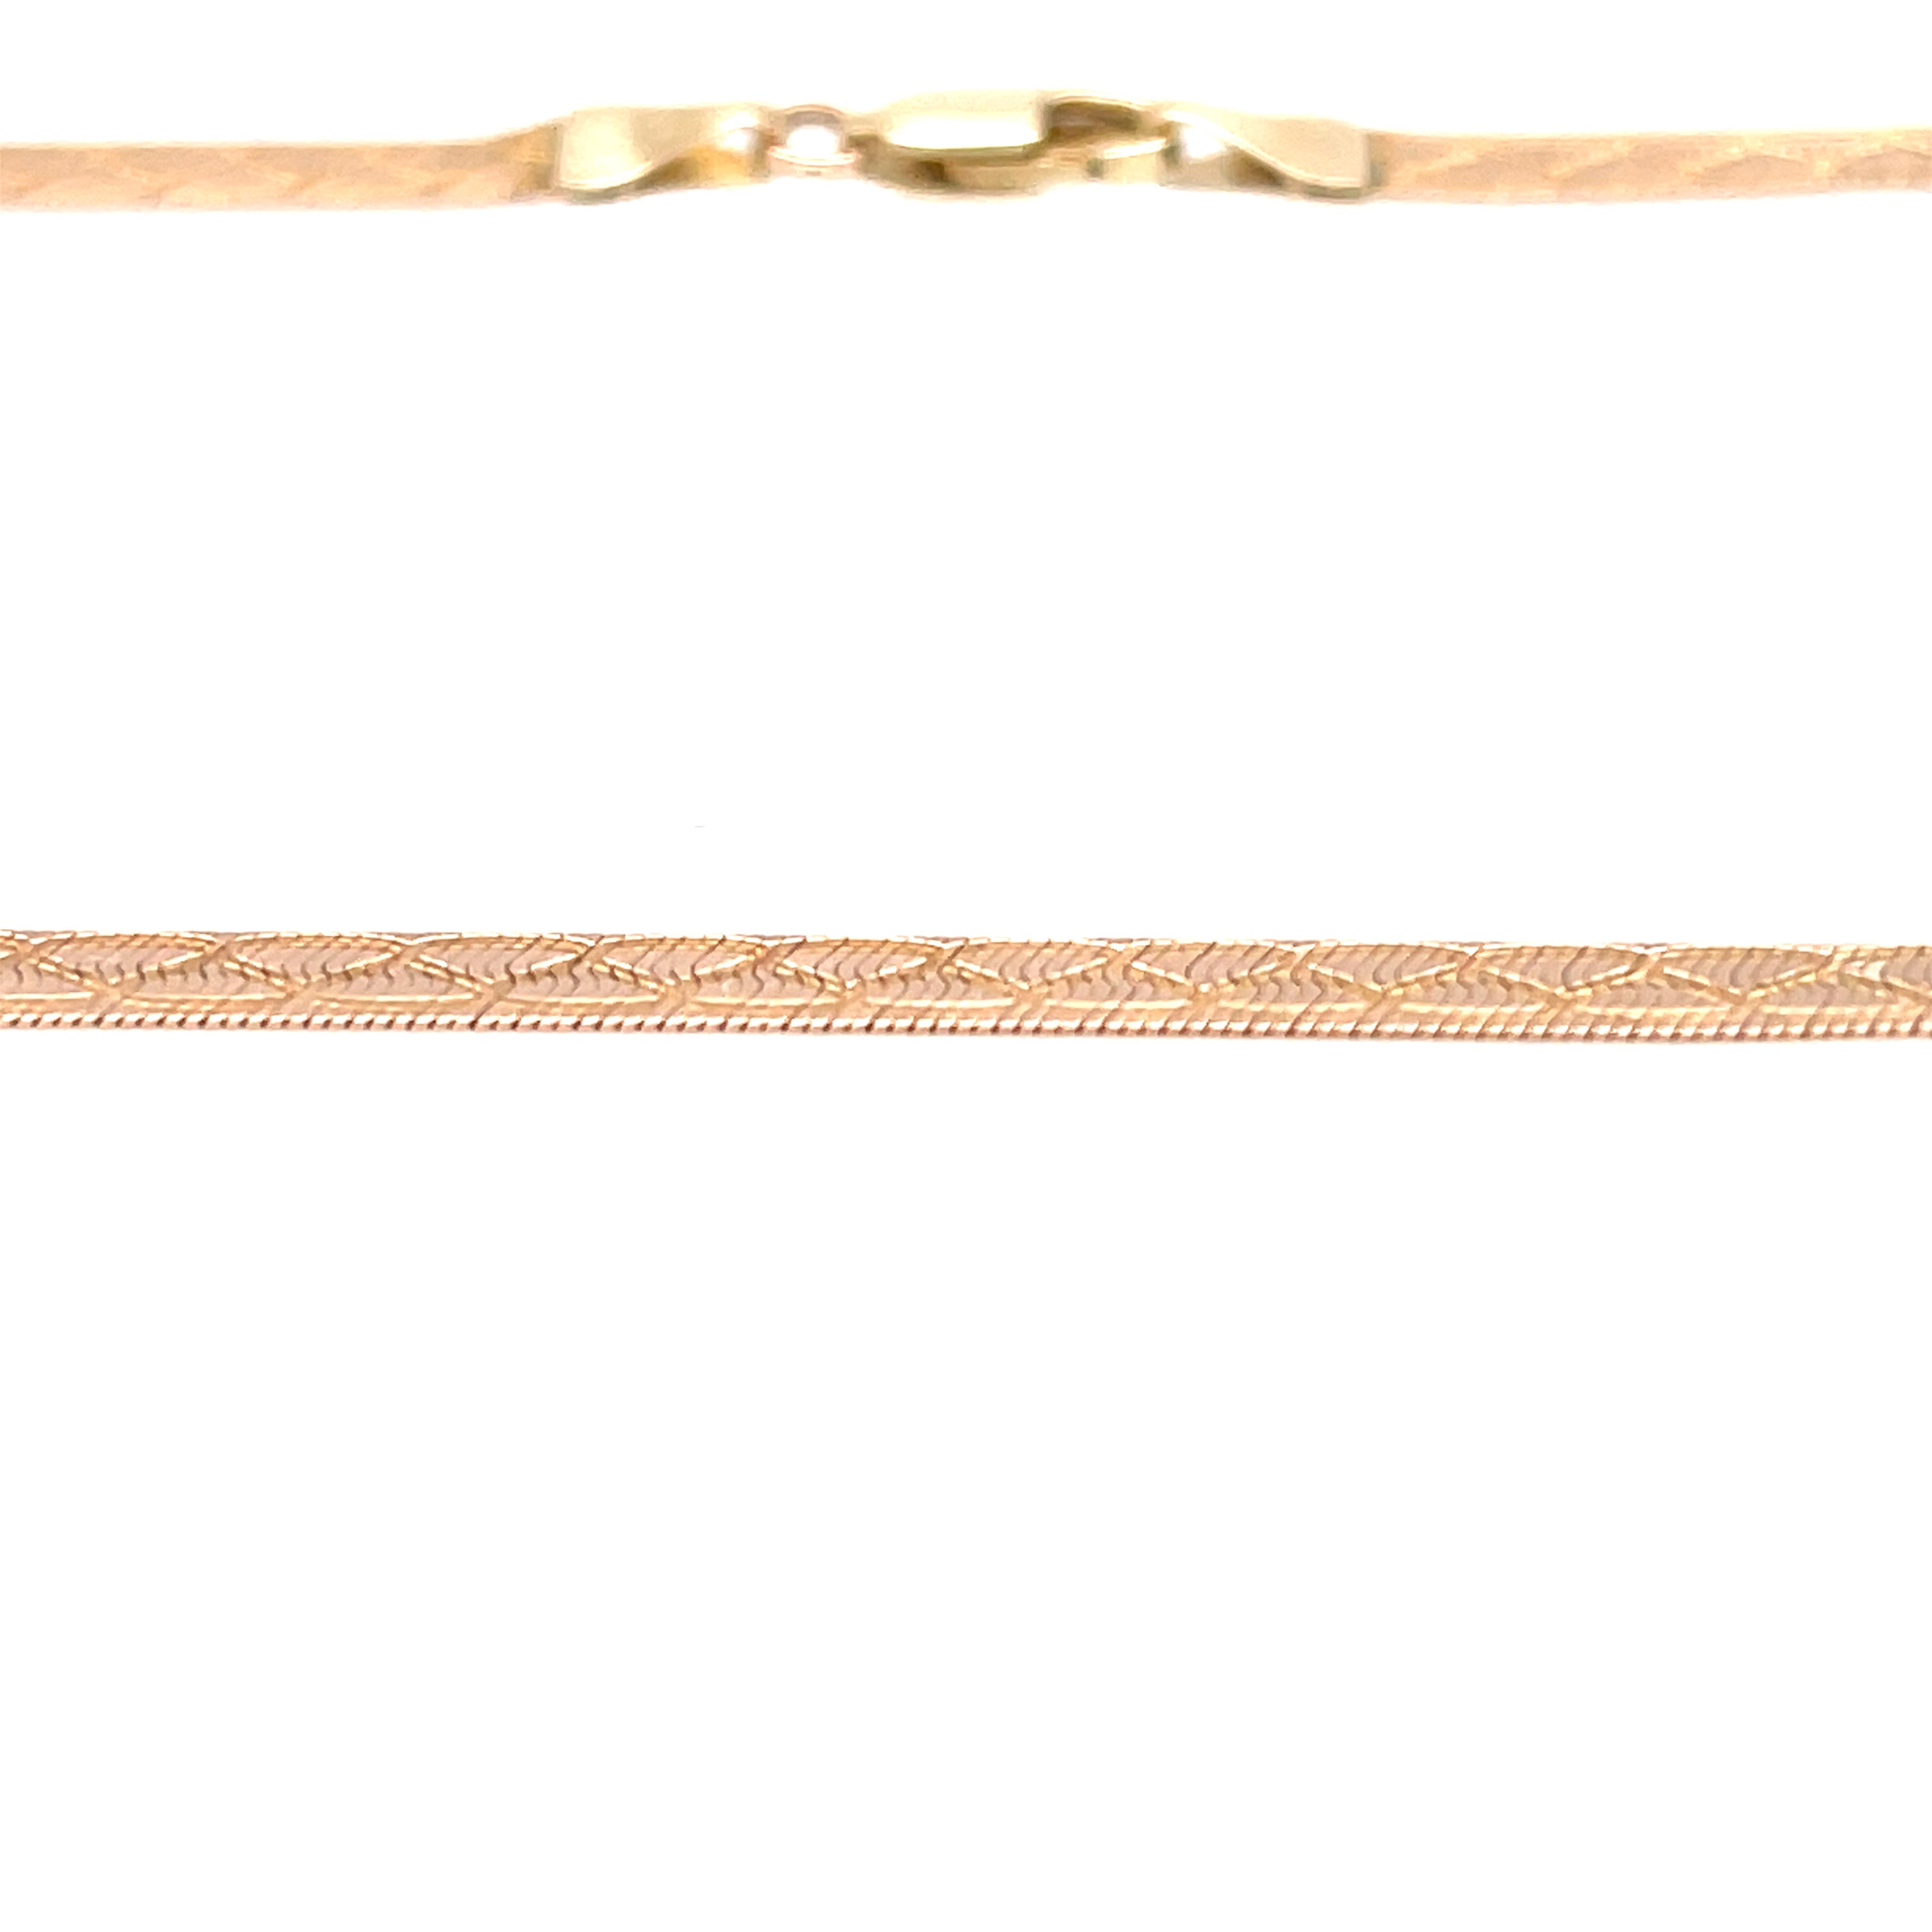 9ct Yellow Gold 16" Patterned Herringbone Link Necklace - 5.30g SOLD